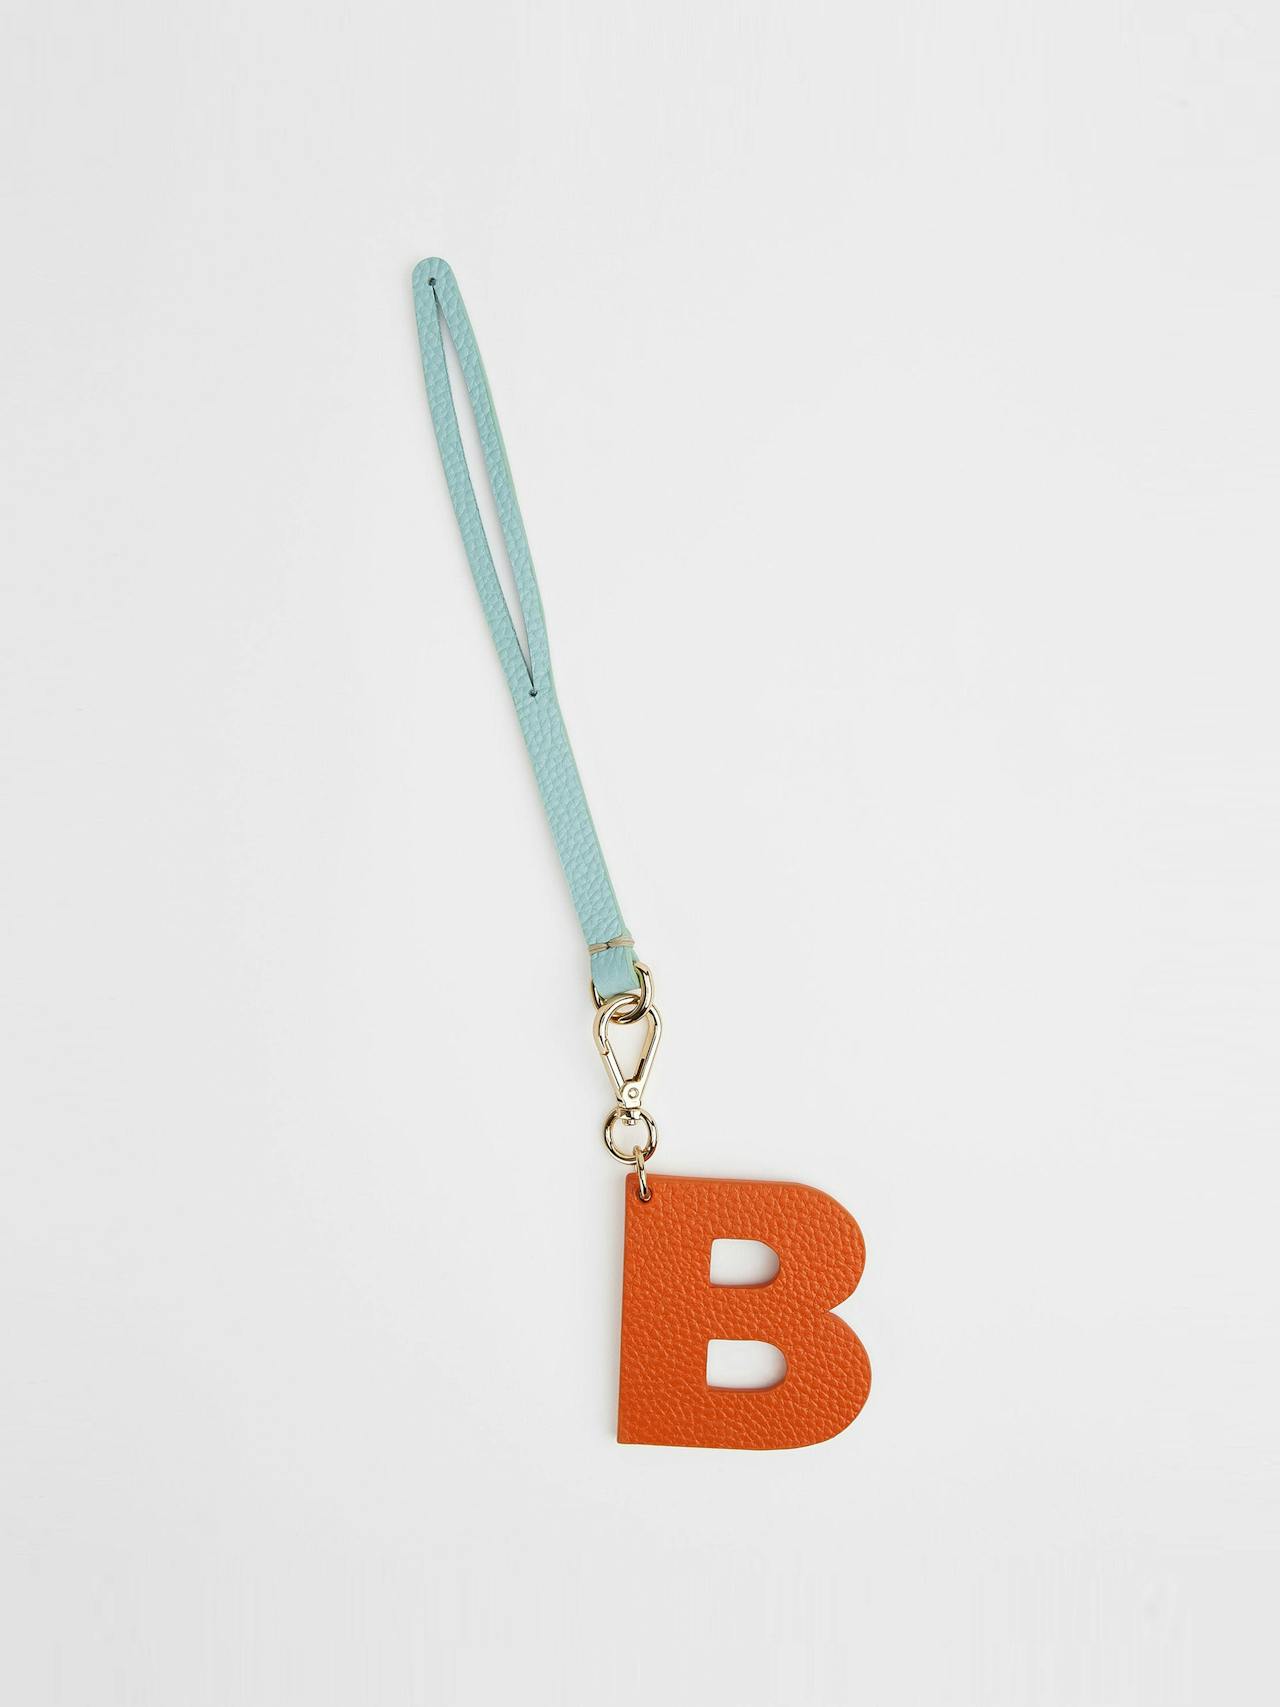 The orange and baby blue letter charm